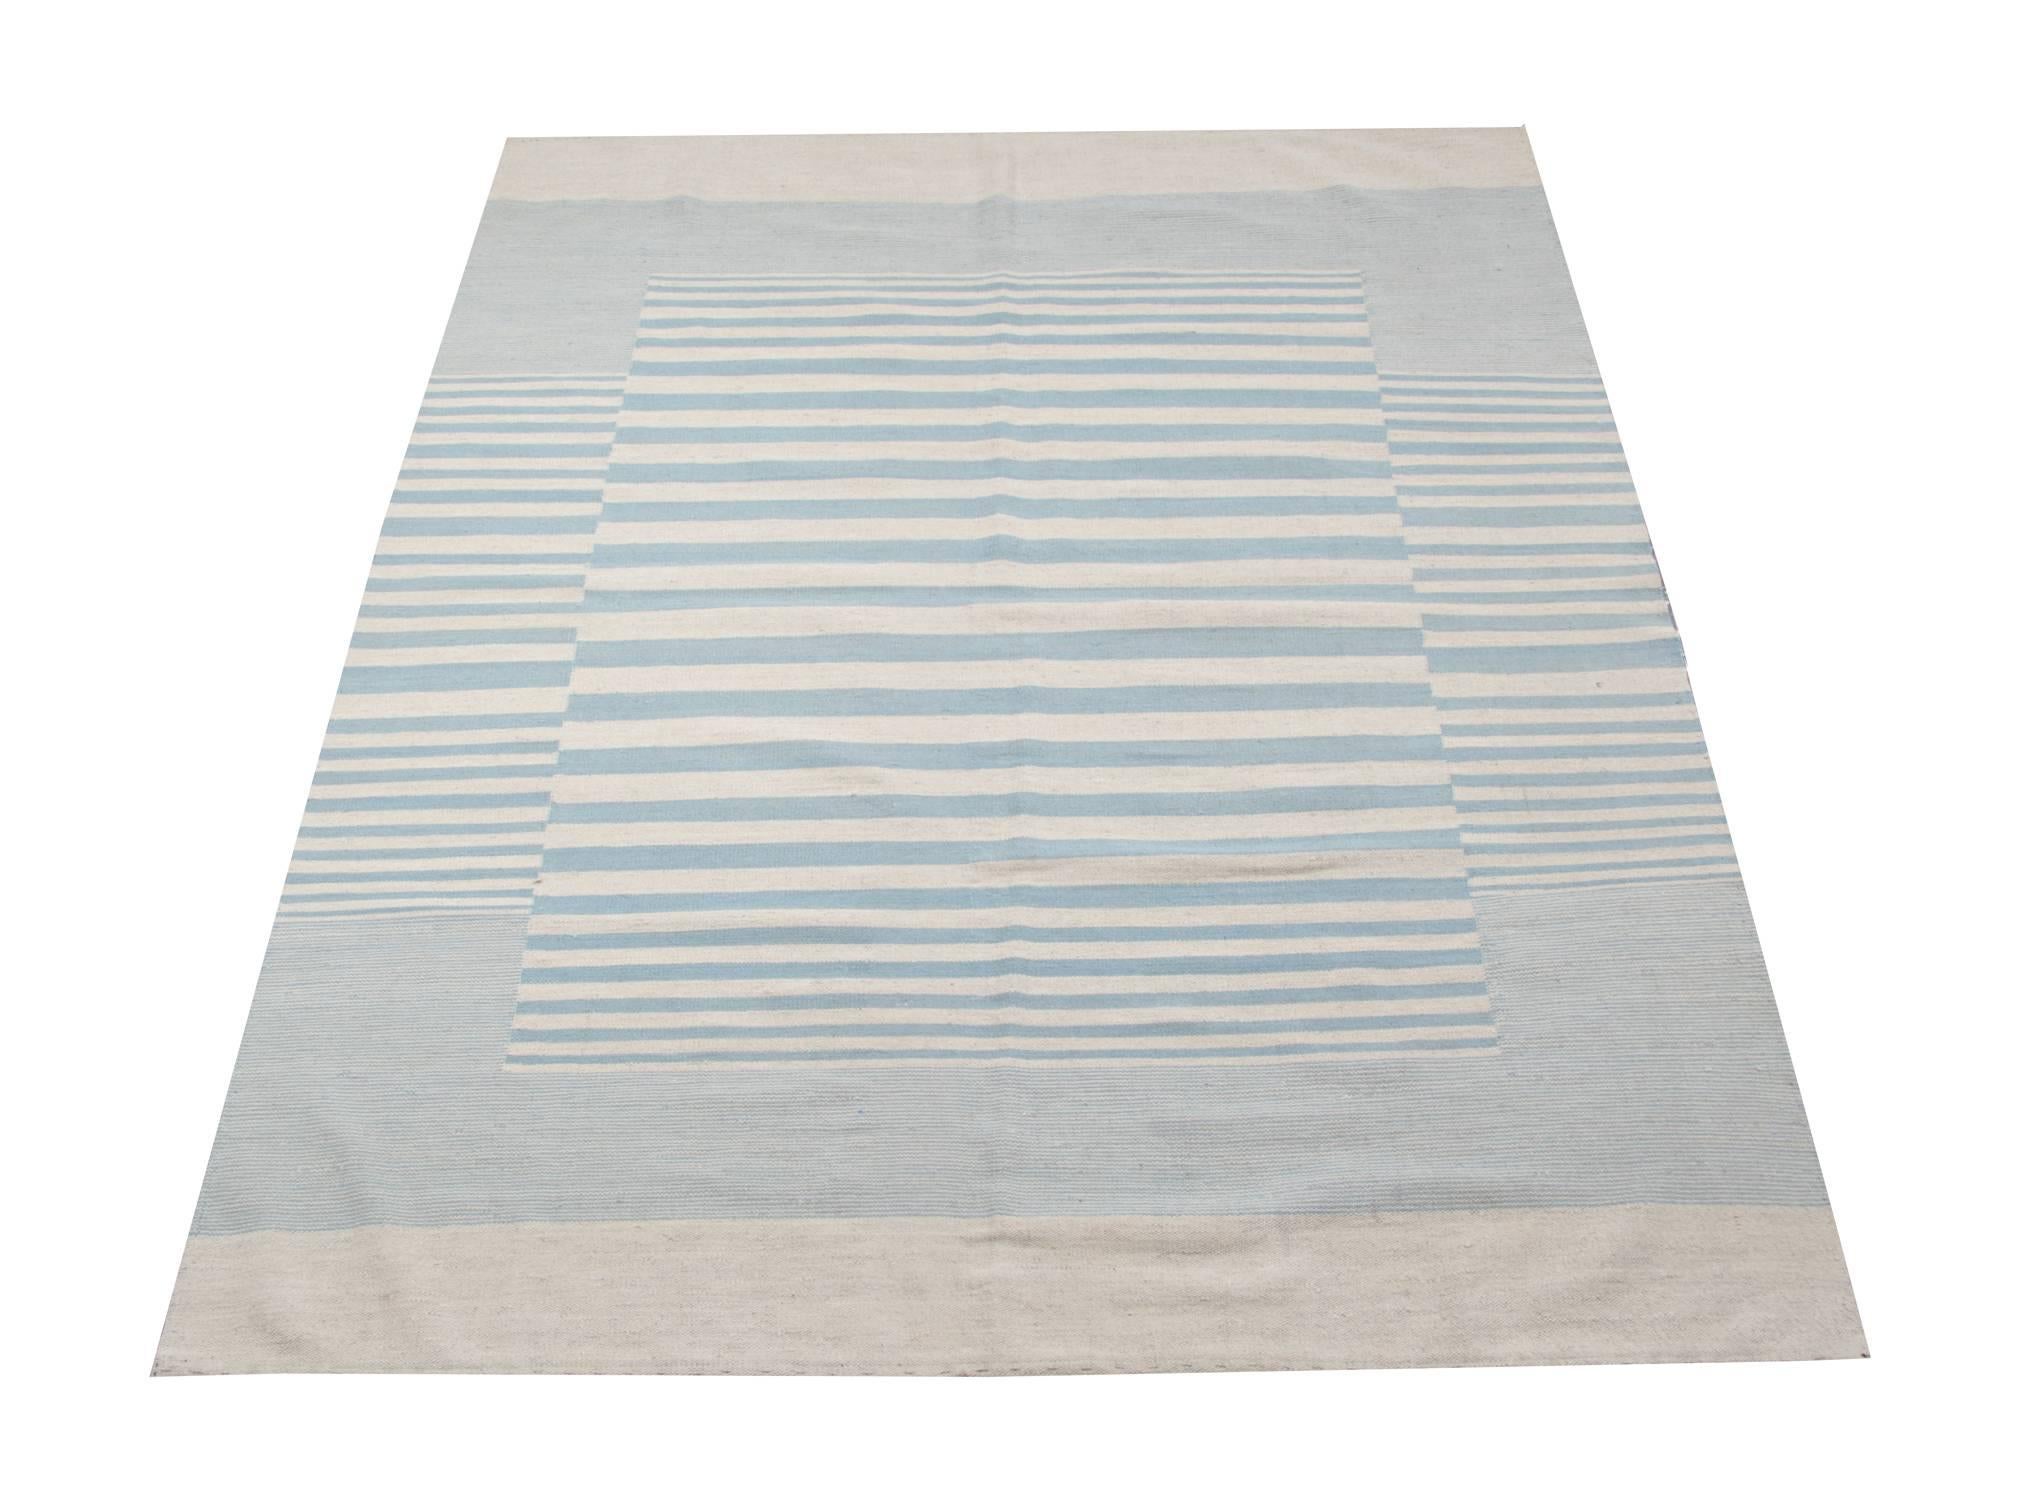 This striped rug is 100% handmade in Afghanistan. Kilim rugs are flat woven. The materials used for these handmade rugs are wool and cotton. Only organic dyes were used for these luxury rugs. This light blue rug is hard-wearing and therefore will